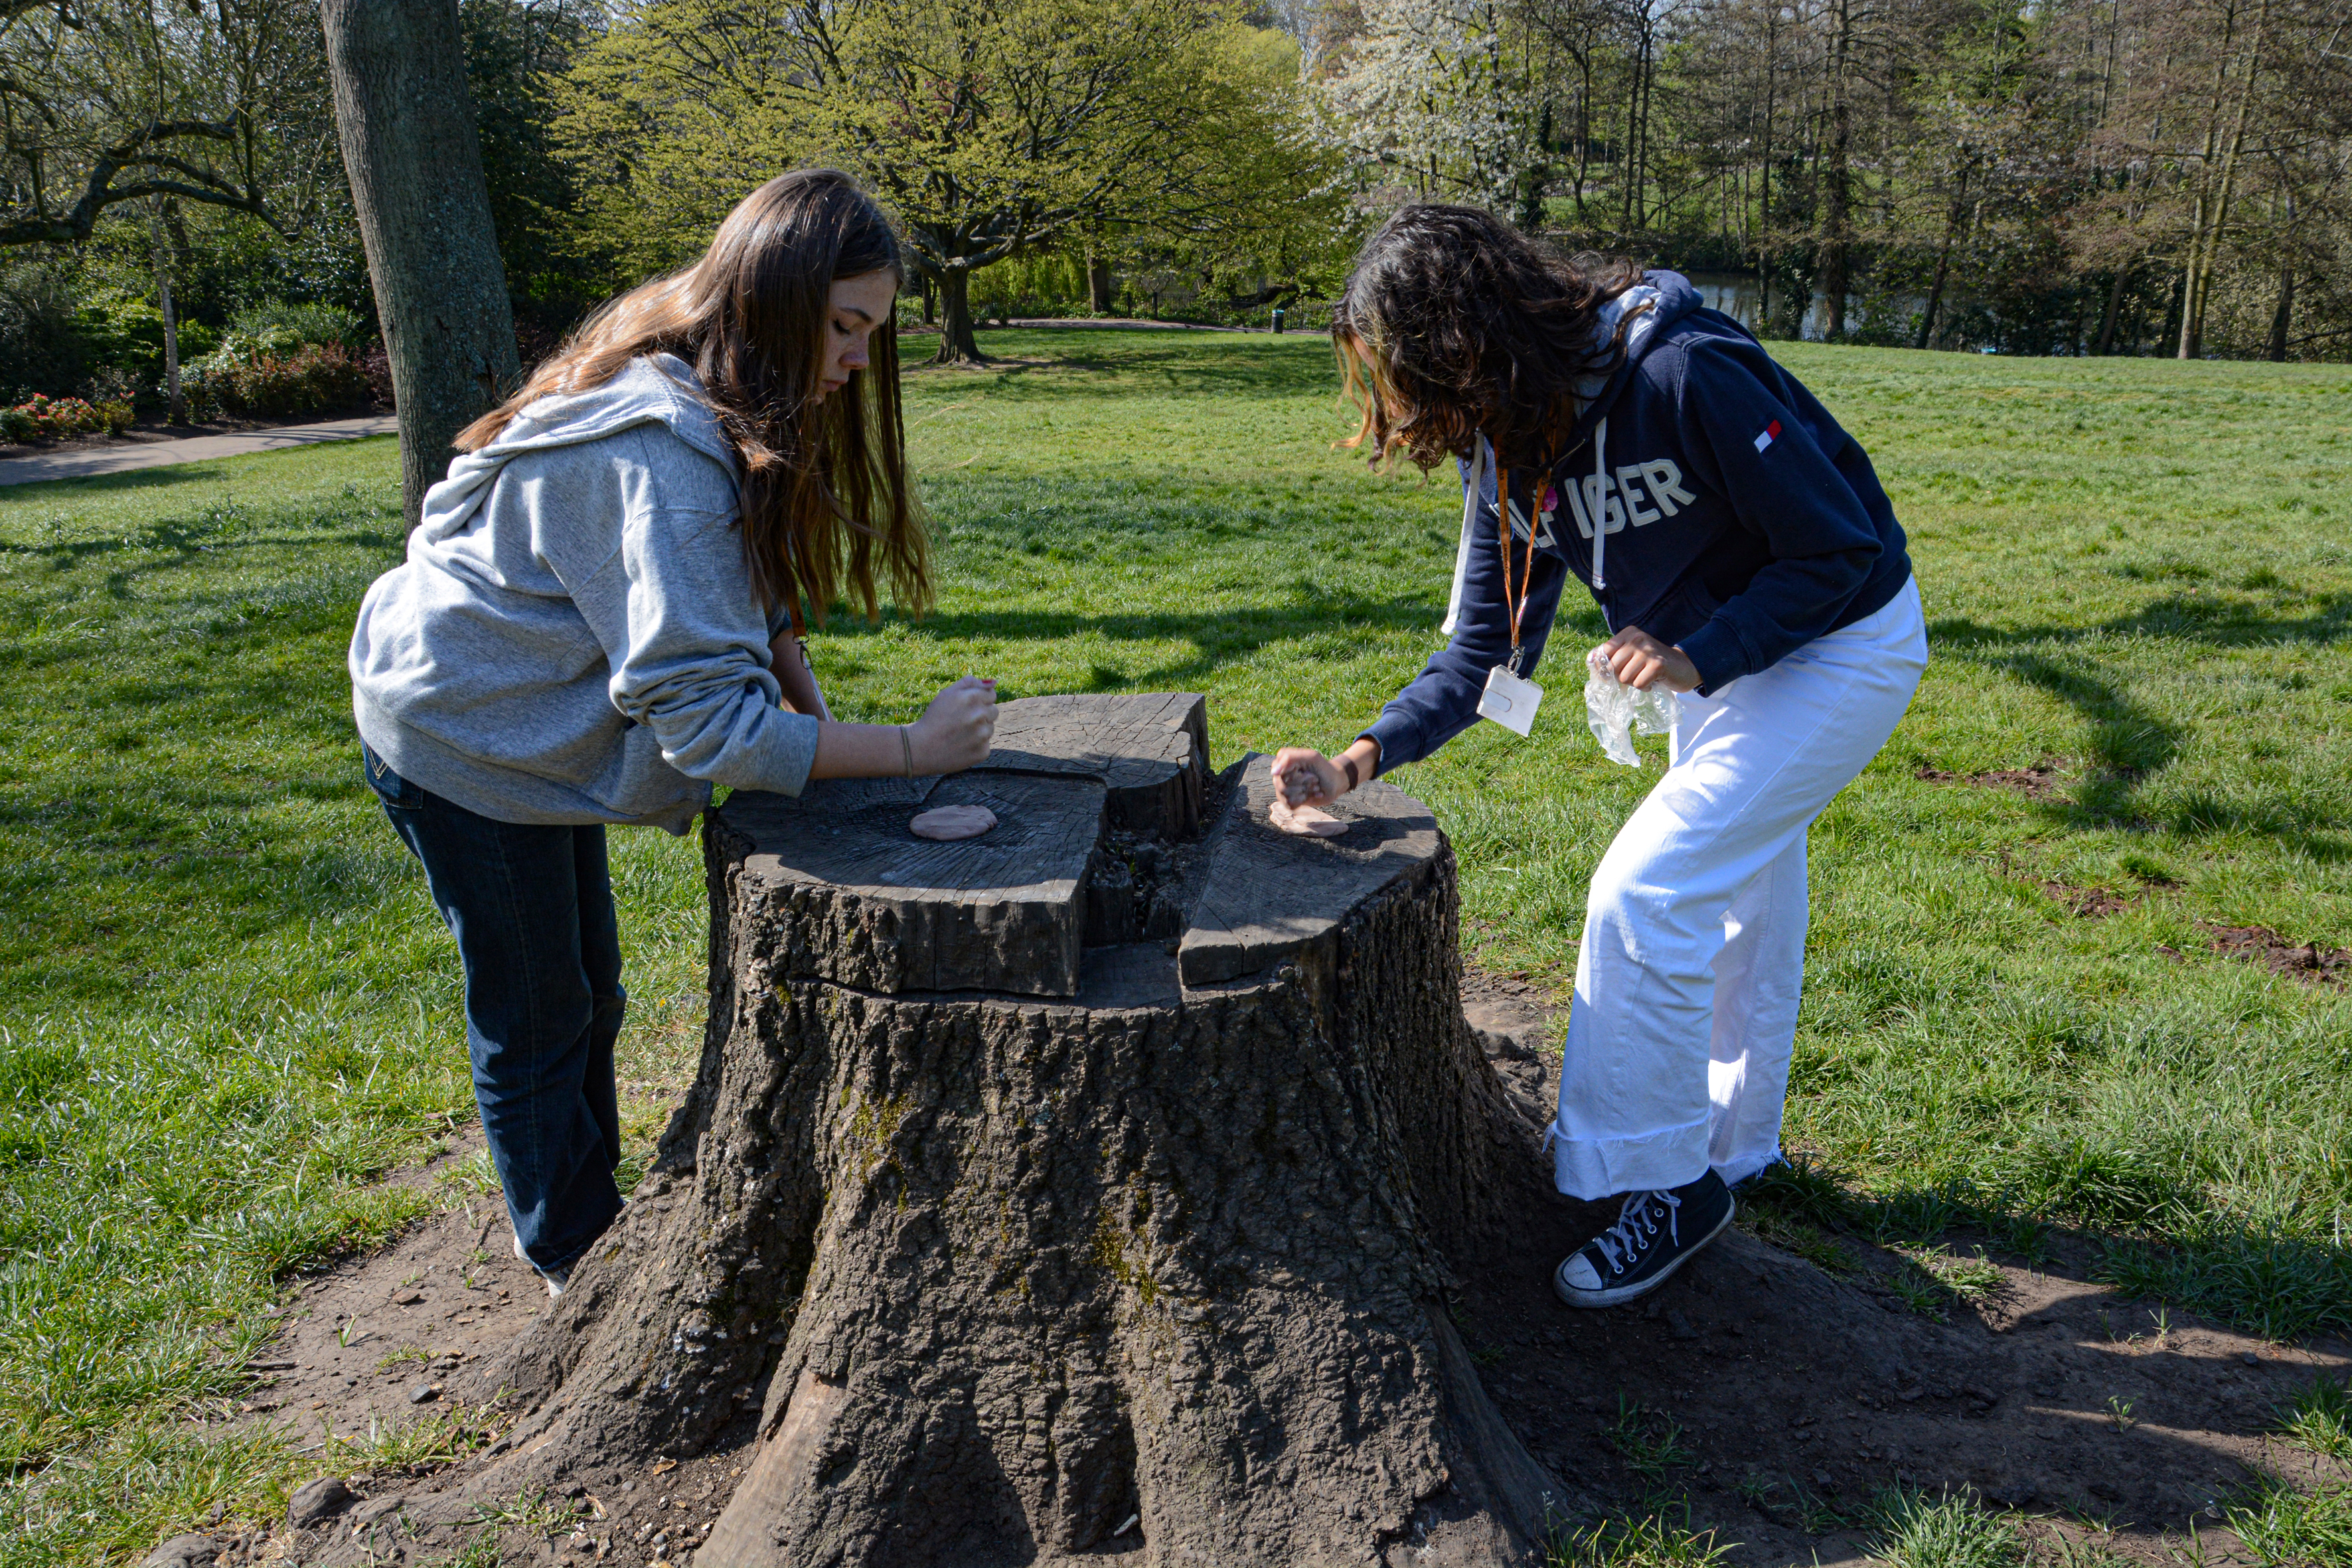 Two students placing their art on a tree stump